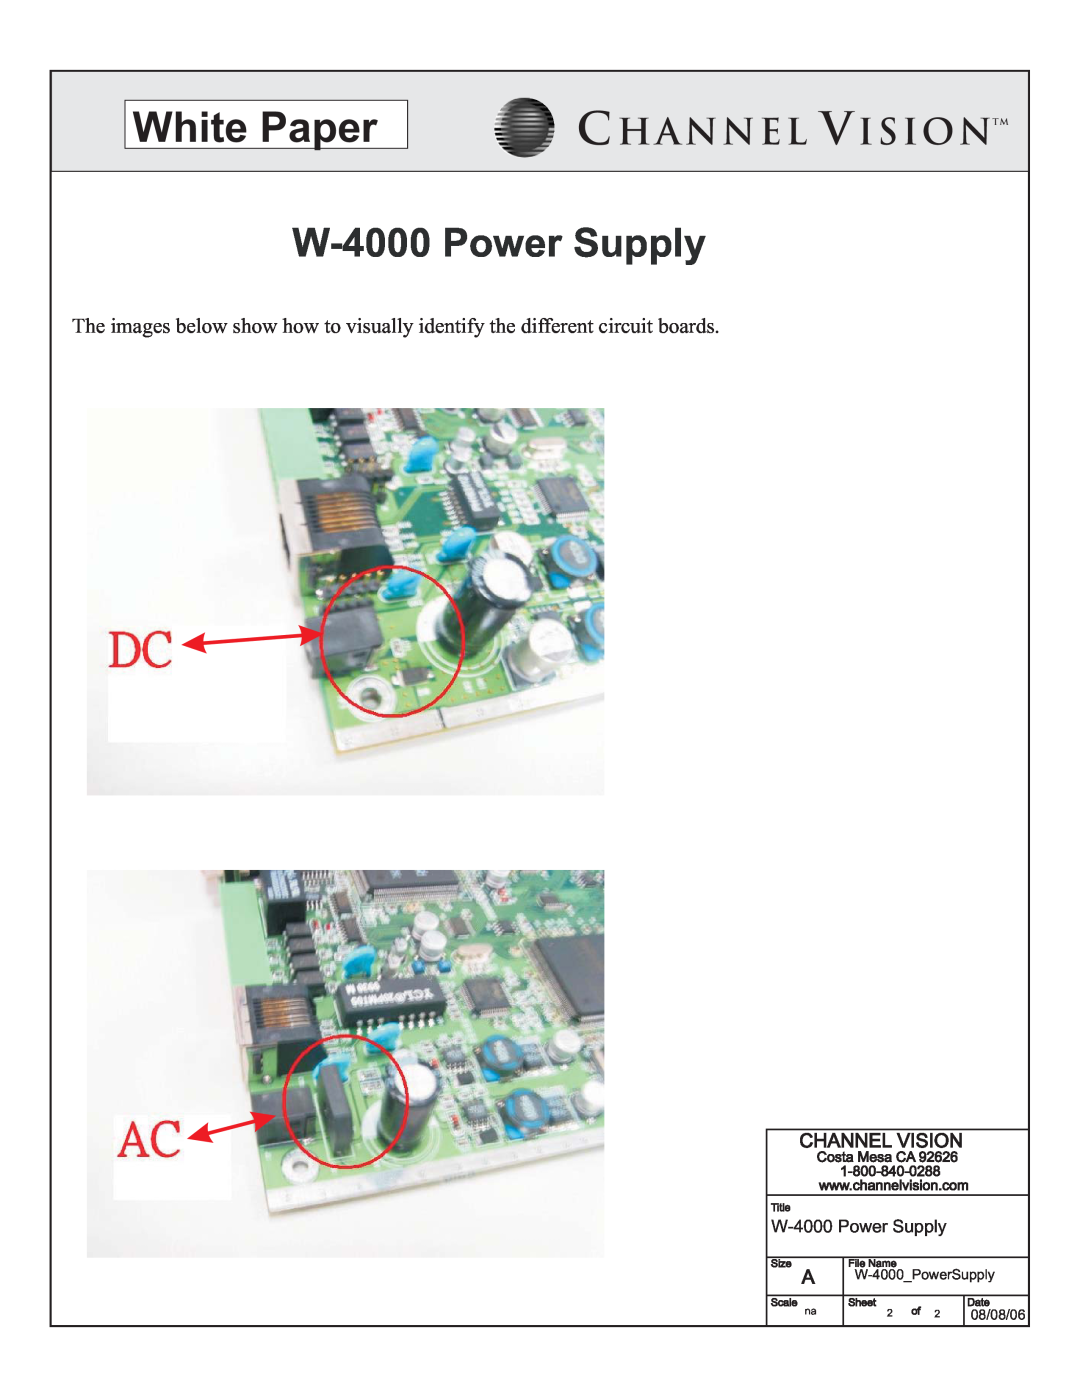 Channel Vision White Paper, W-4000 Power Supply, Channel Visiontm, W-4000PowerSupply, 08/08/06, Costa Mesa CA, Title 